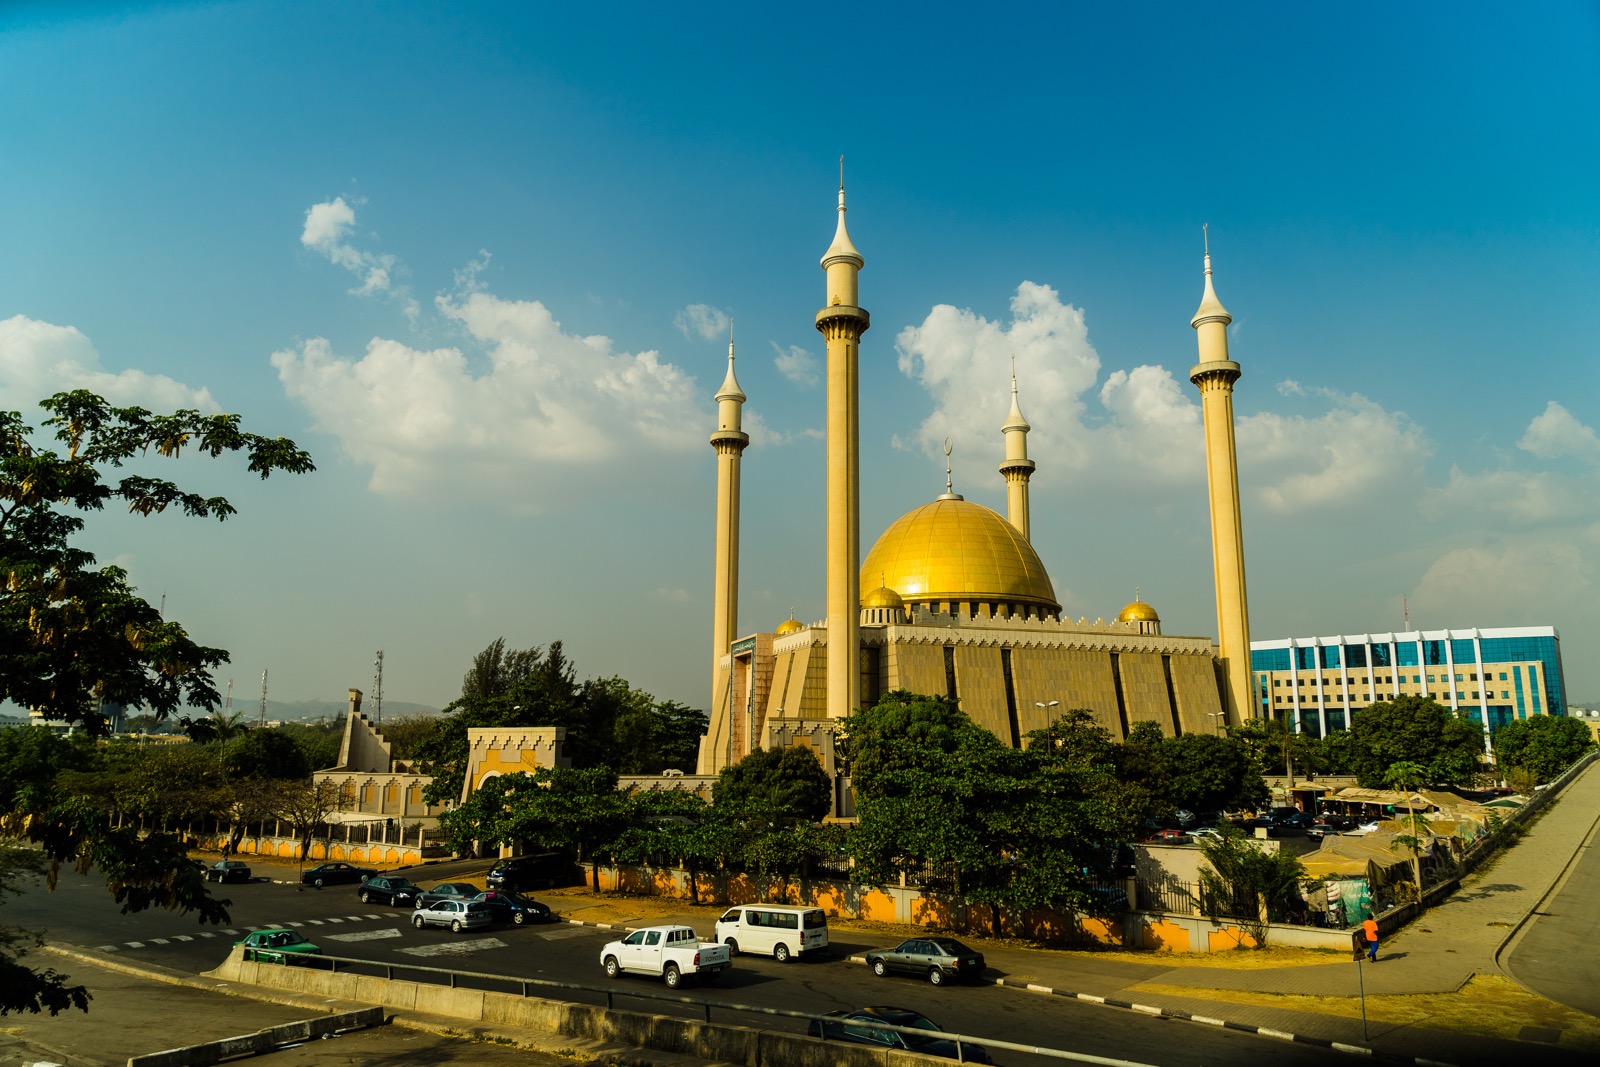 This City-Country Matching Quiz Gets Progressively Harder Abuja National Mosque, Nigeria